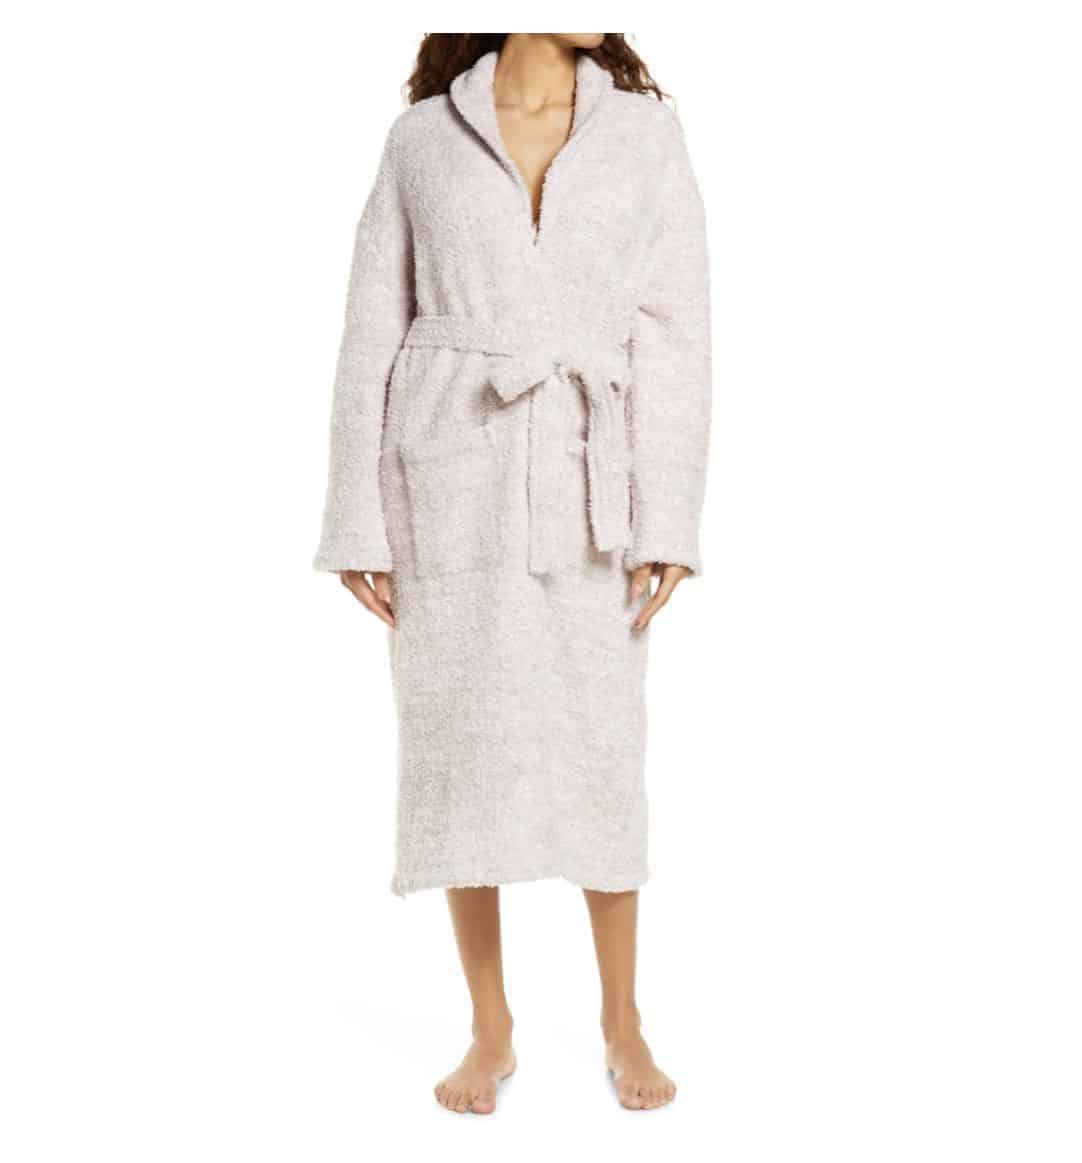 cozy-robe-gift-ideas-for-mothers-day